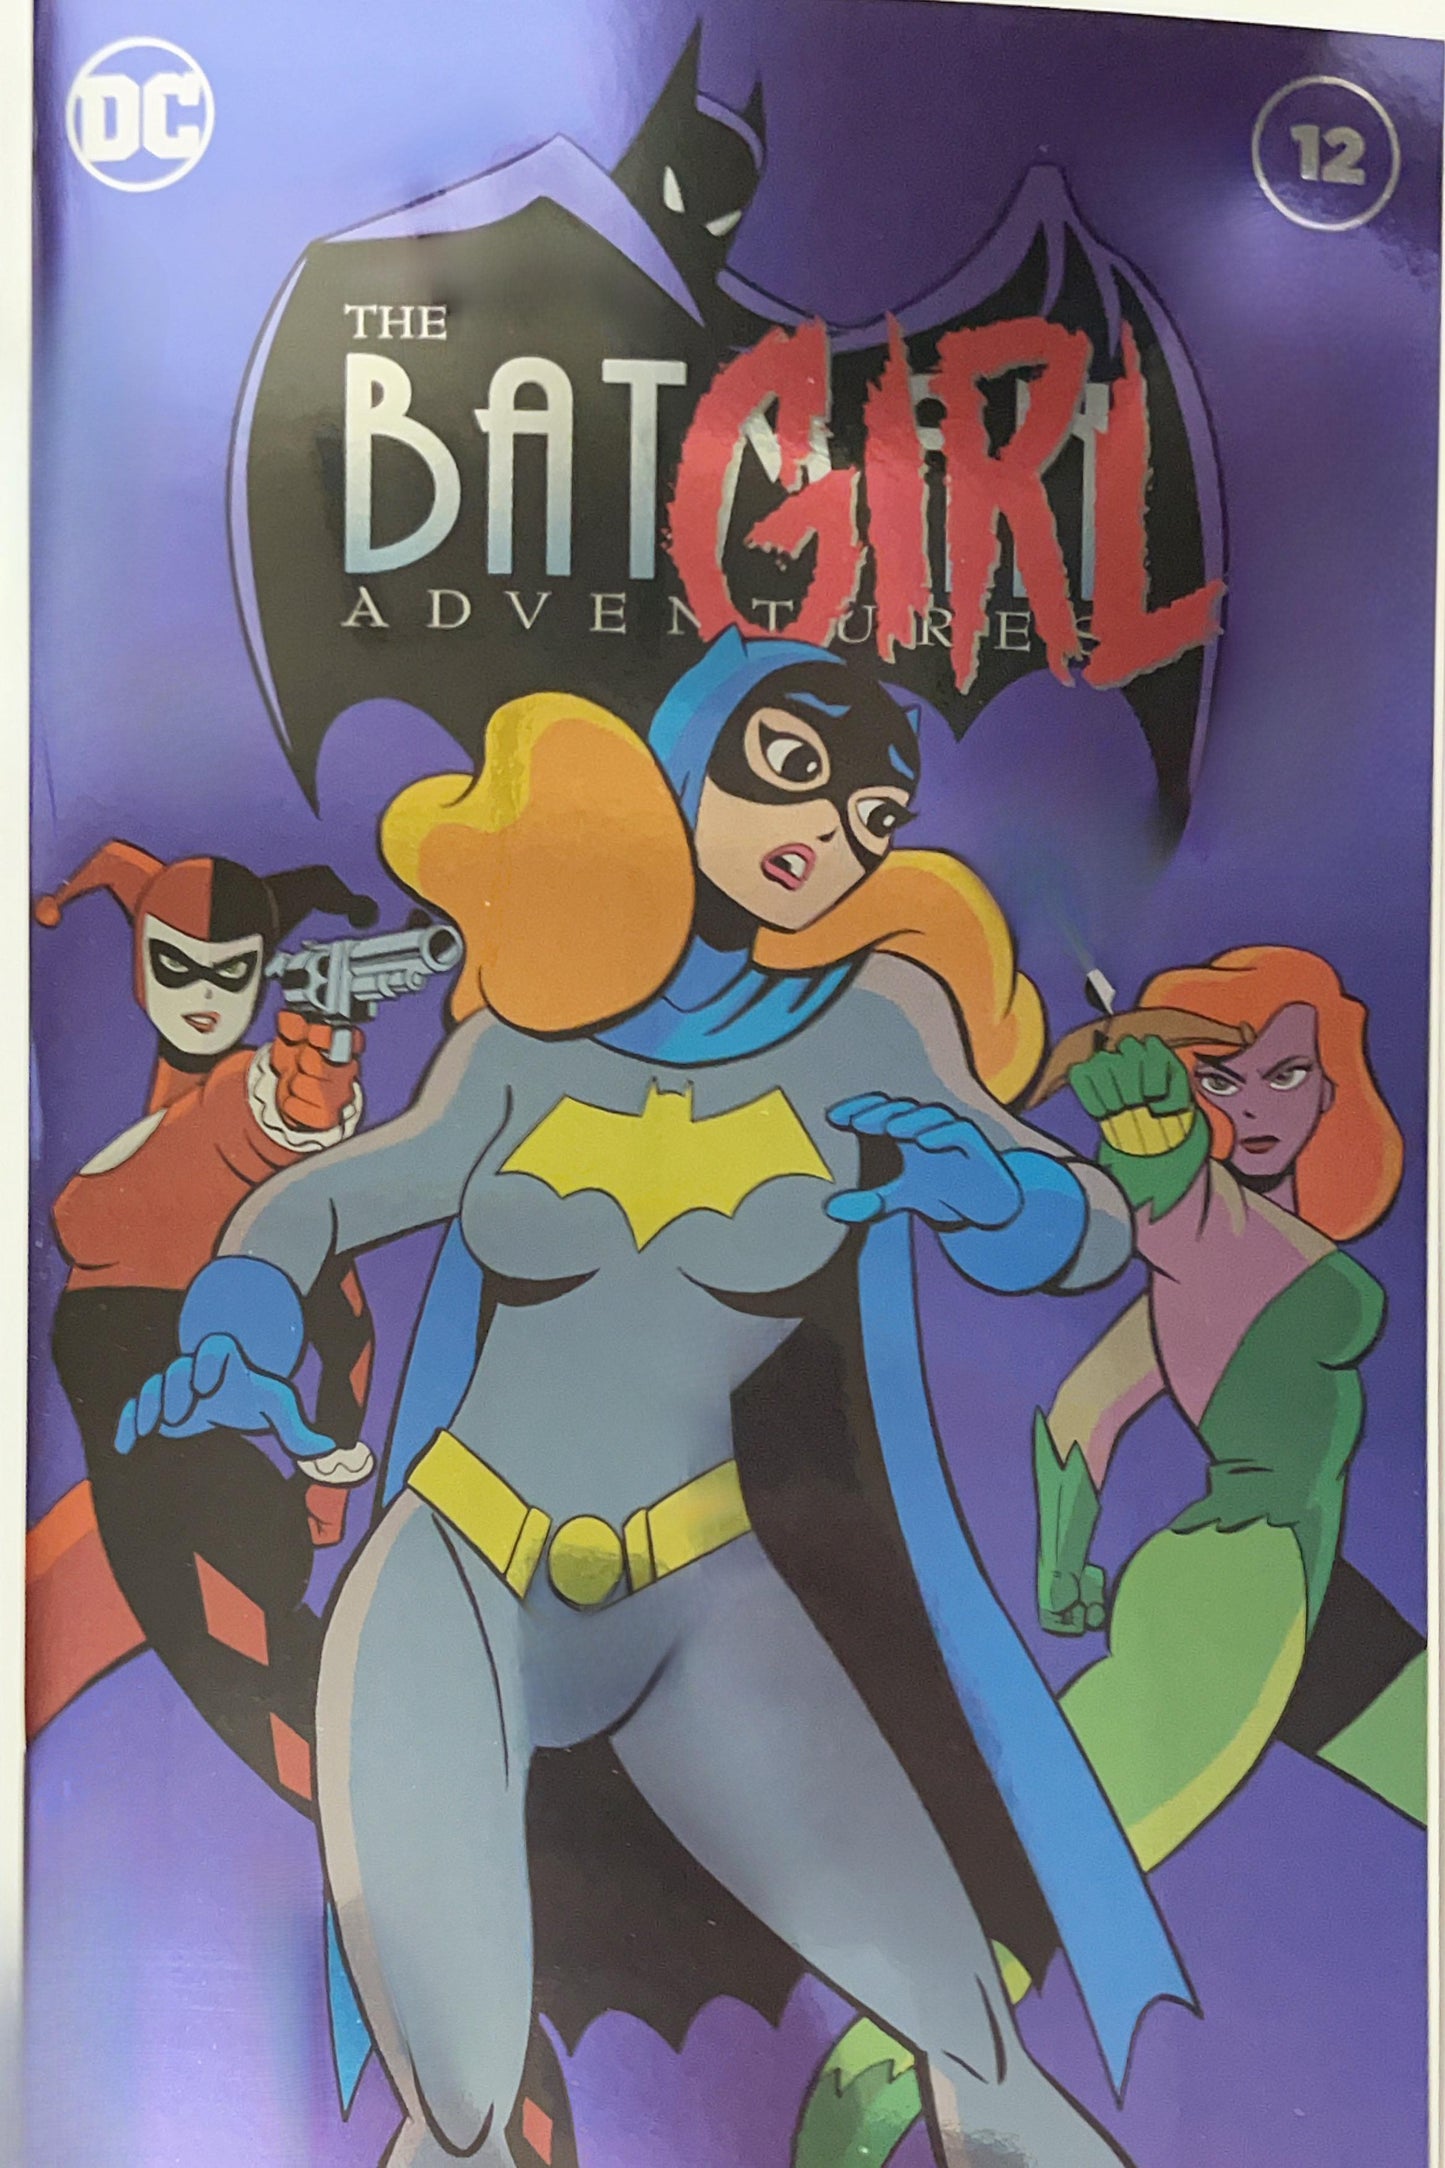 BATMAN ADVENTURES #12 30TH ANNIVERSARY FOIL USA ENGLISH NYCC 2023 EDITION LIMITED TO 500 COPIES